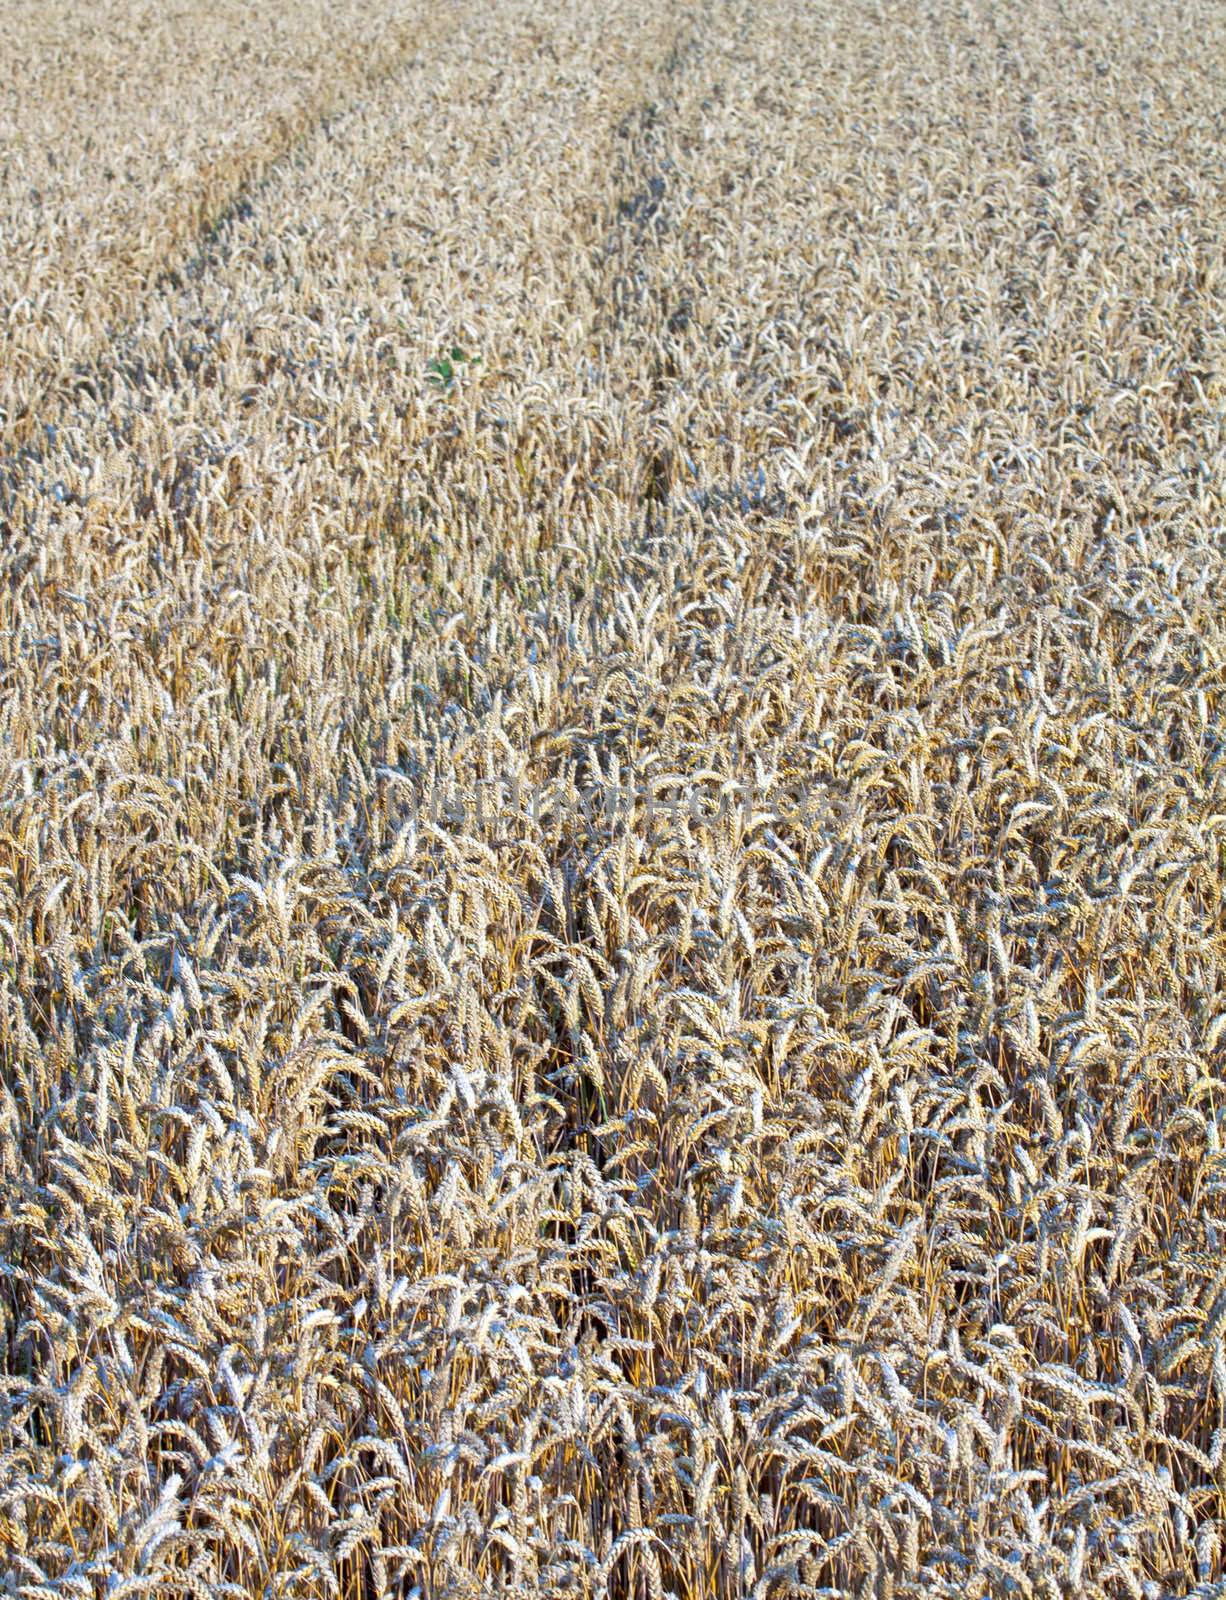 Close up of a field of wheat ears